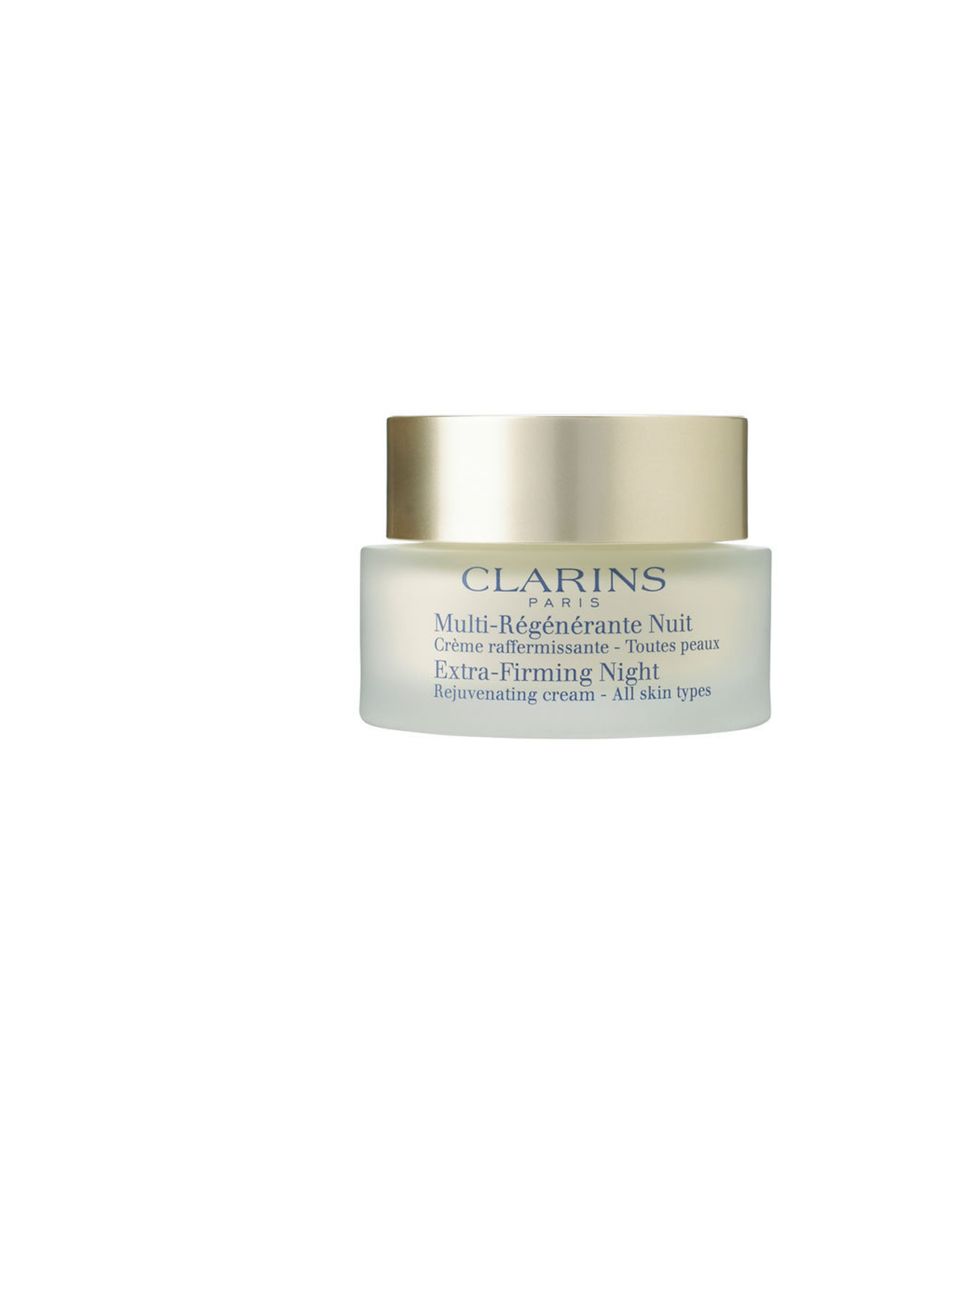 <p>The light, gel-like texture instantly lifts the skin while the active botanical ingredients leave you looking like youve had 12 hours sleep.</p><p><em><a href="http://www.clarins.co.uk/Extra-Firming%20Night%20Cream%20%22All%20Skin%20Types%22/C0104080